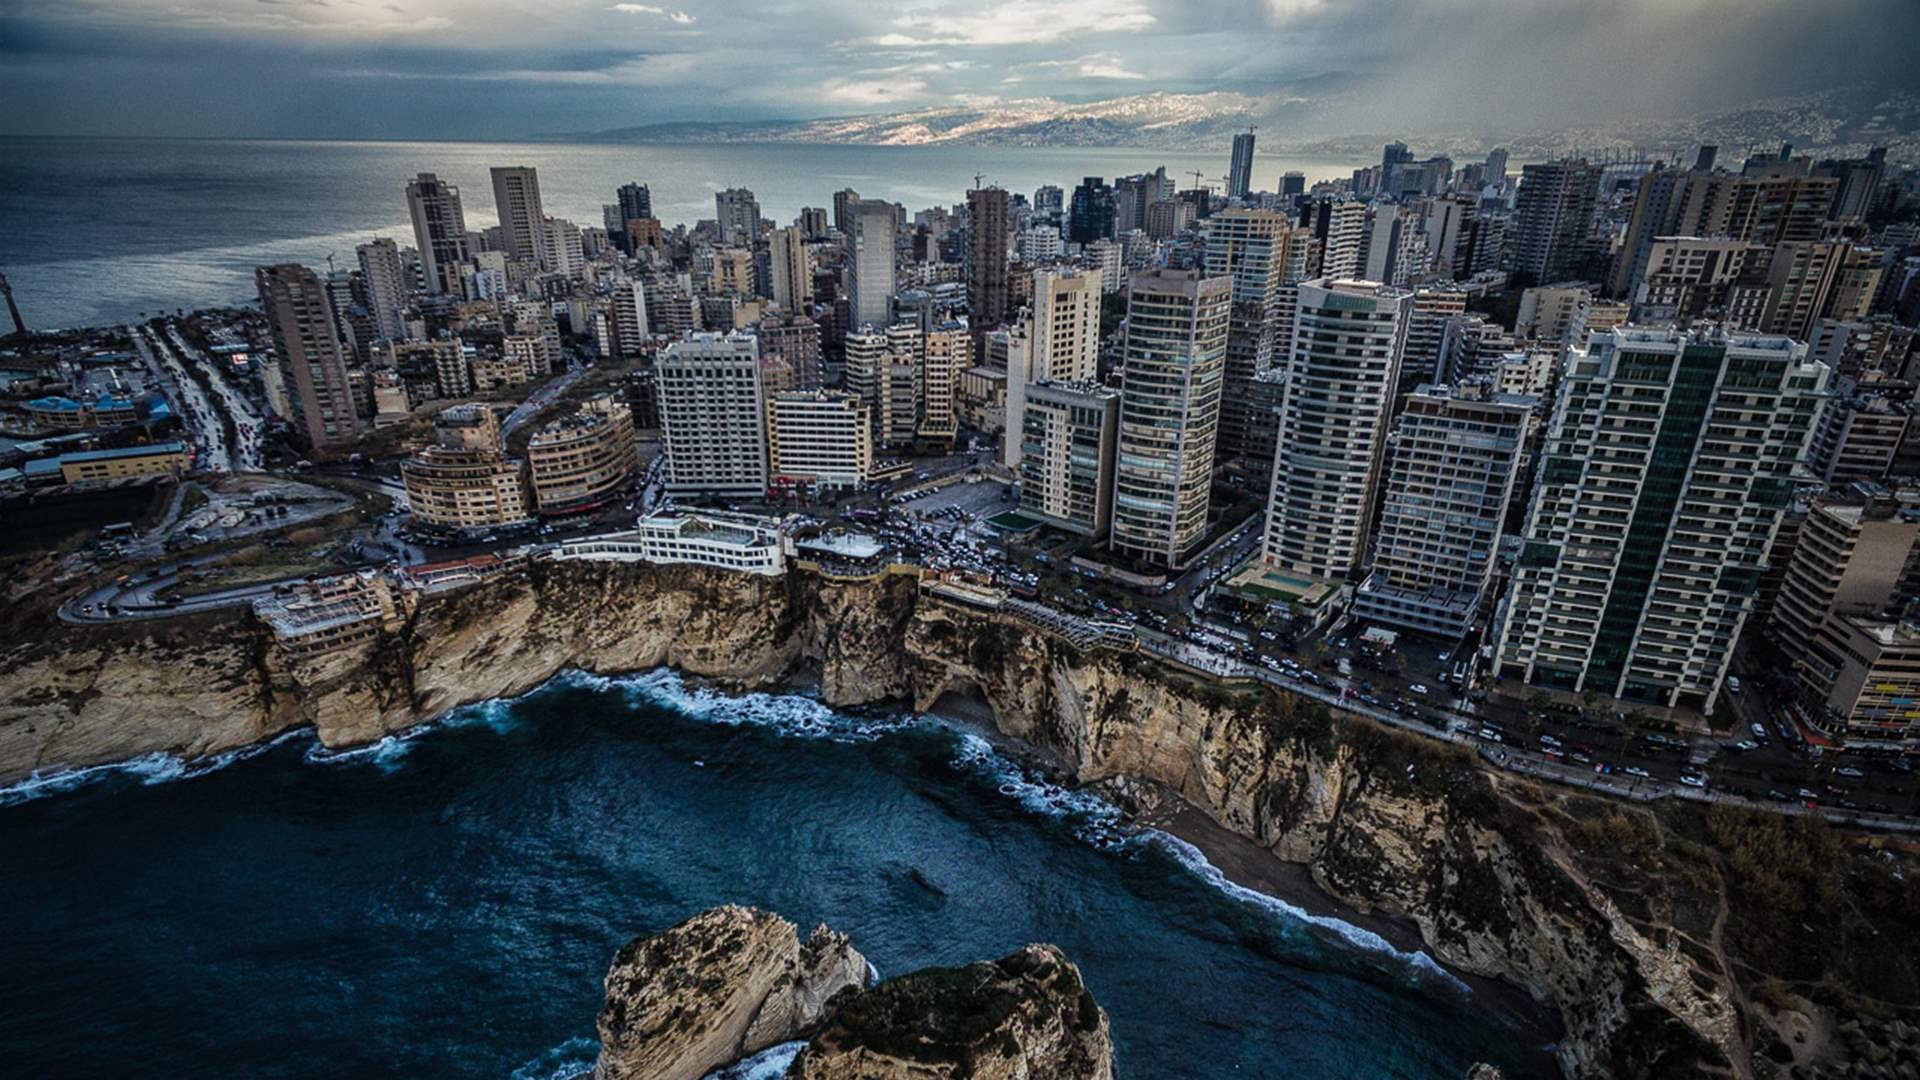 Lebanon&#39;s tourism hit hard: Reservation rates plummet amid ongoing crisis in Gaza and the South